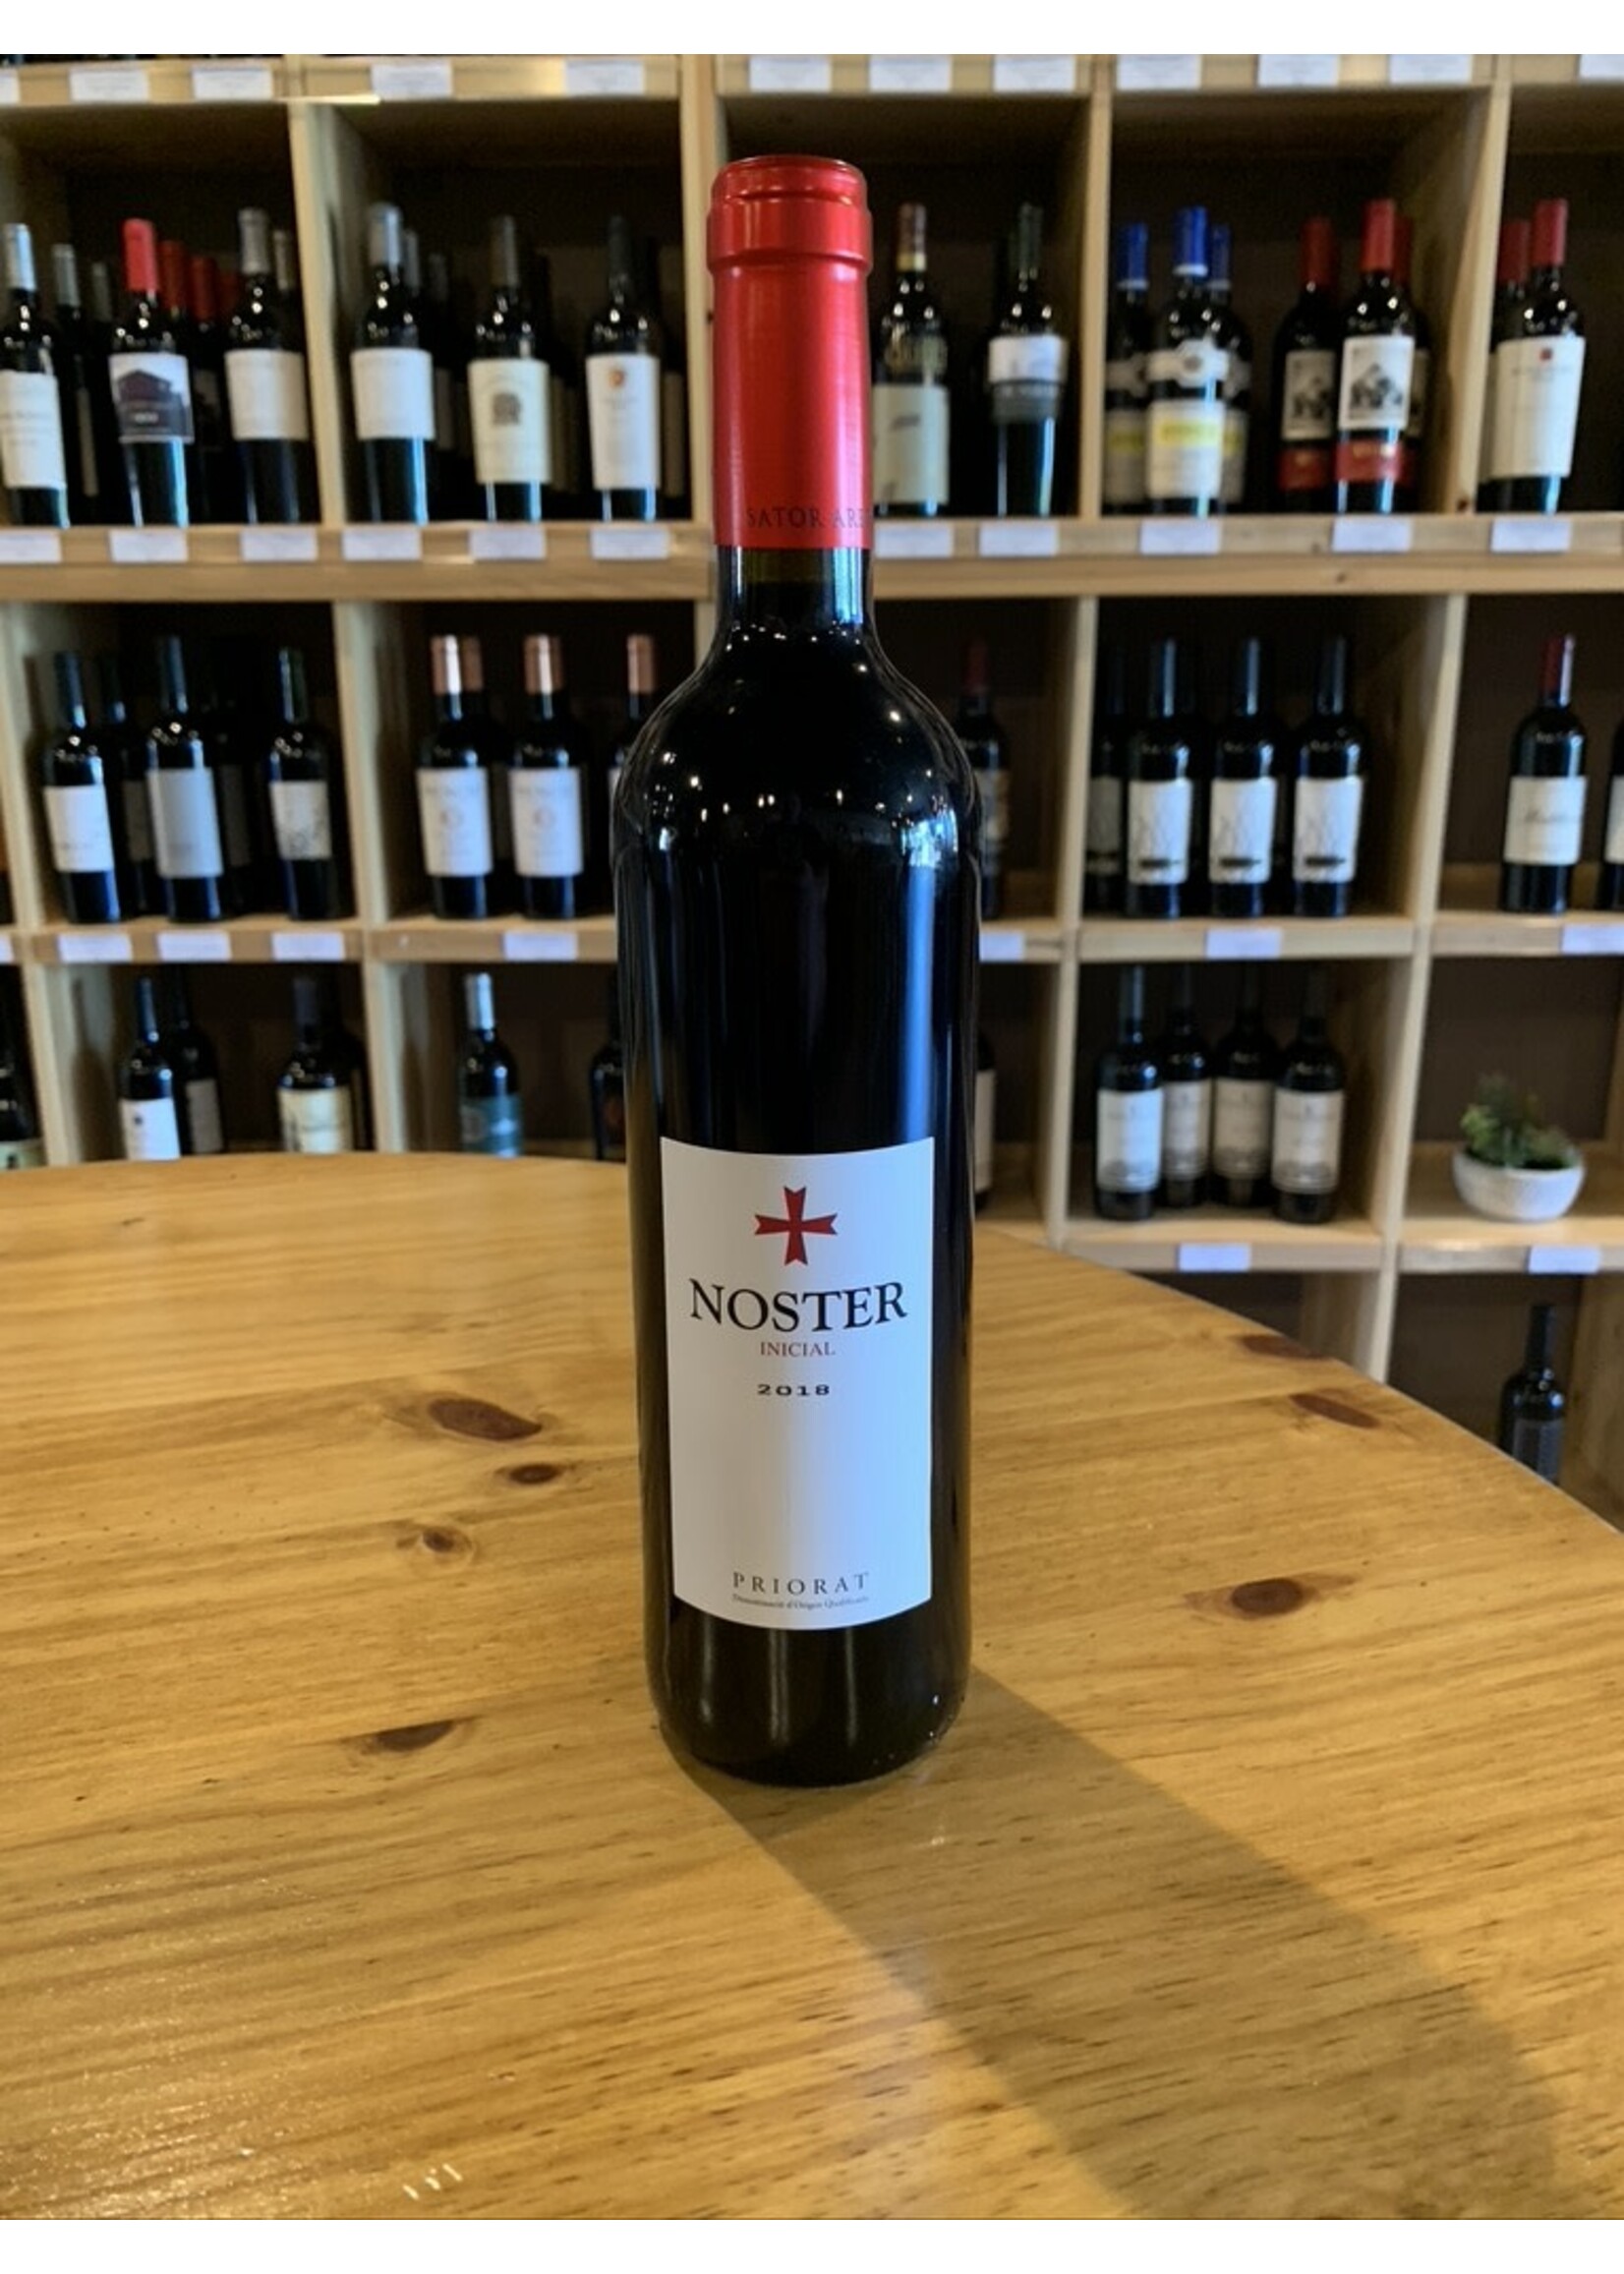 Noster Noster Inicial Priorat